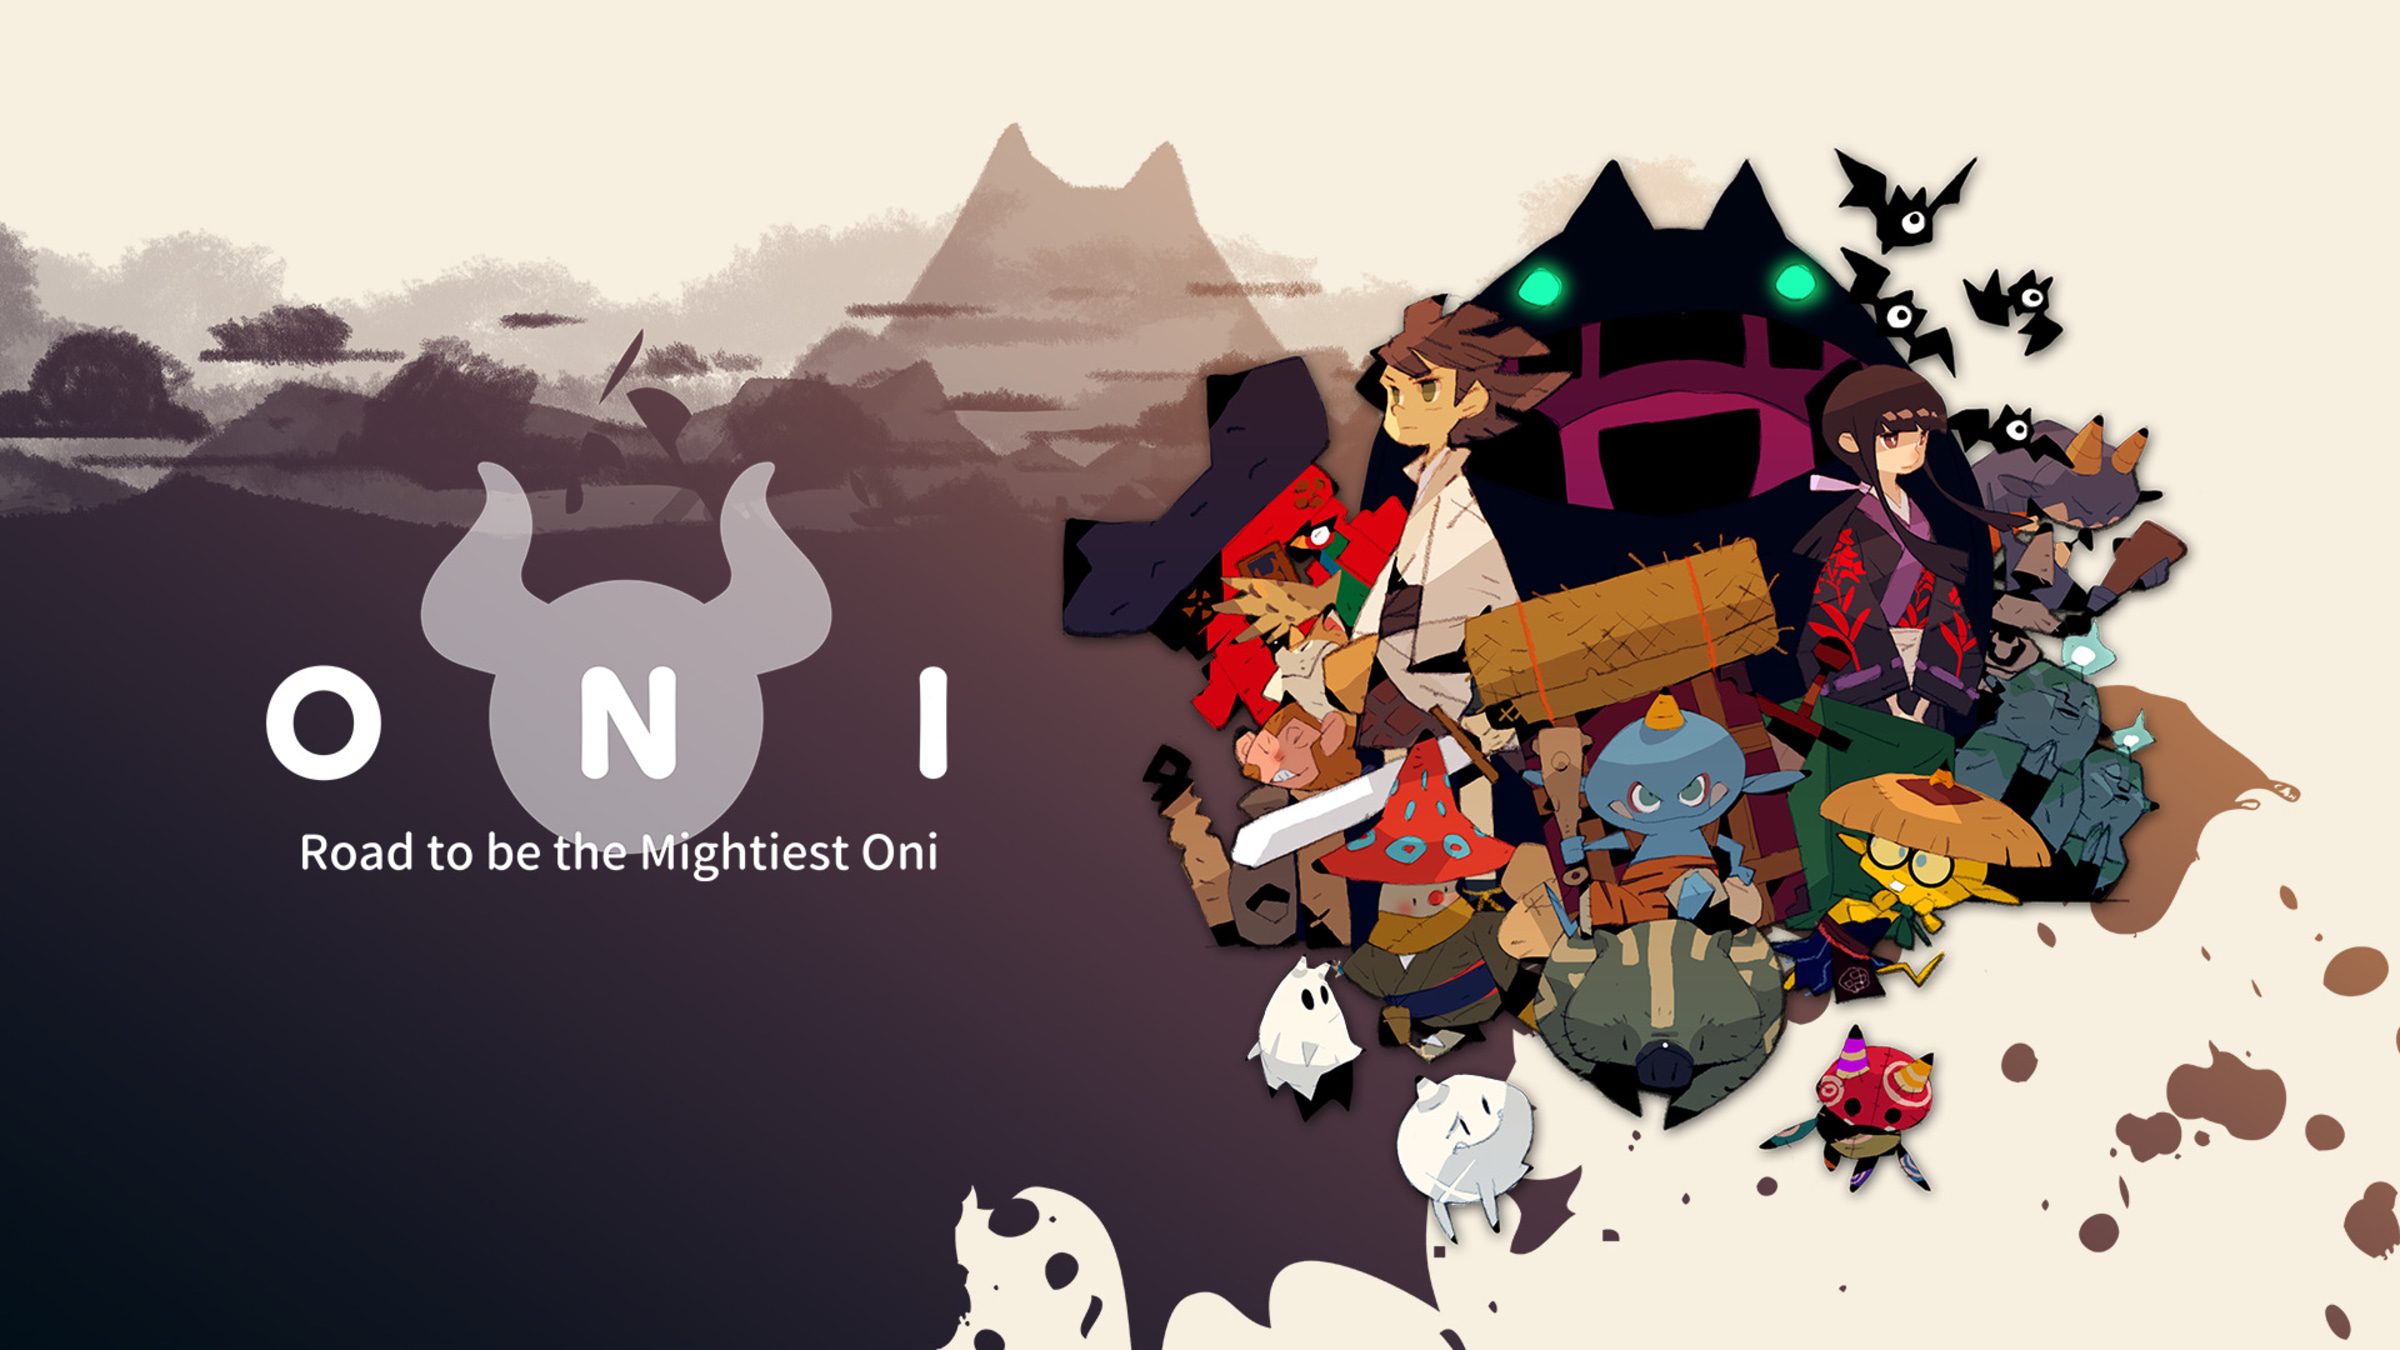 https://assets.nintendo.com/image/upload/c_fill,w_1200/q_auto:best/f_auto/dpr_2.0/ncom/en_US/games/switch/o/oni-road-to-be-the-mightiest-oni-switch/